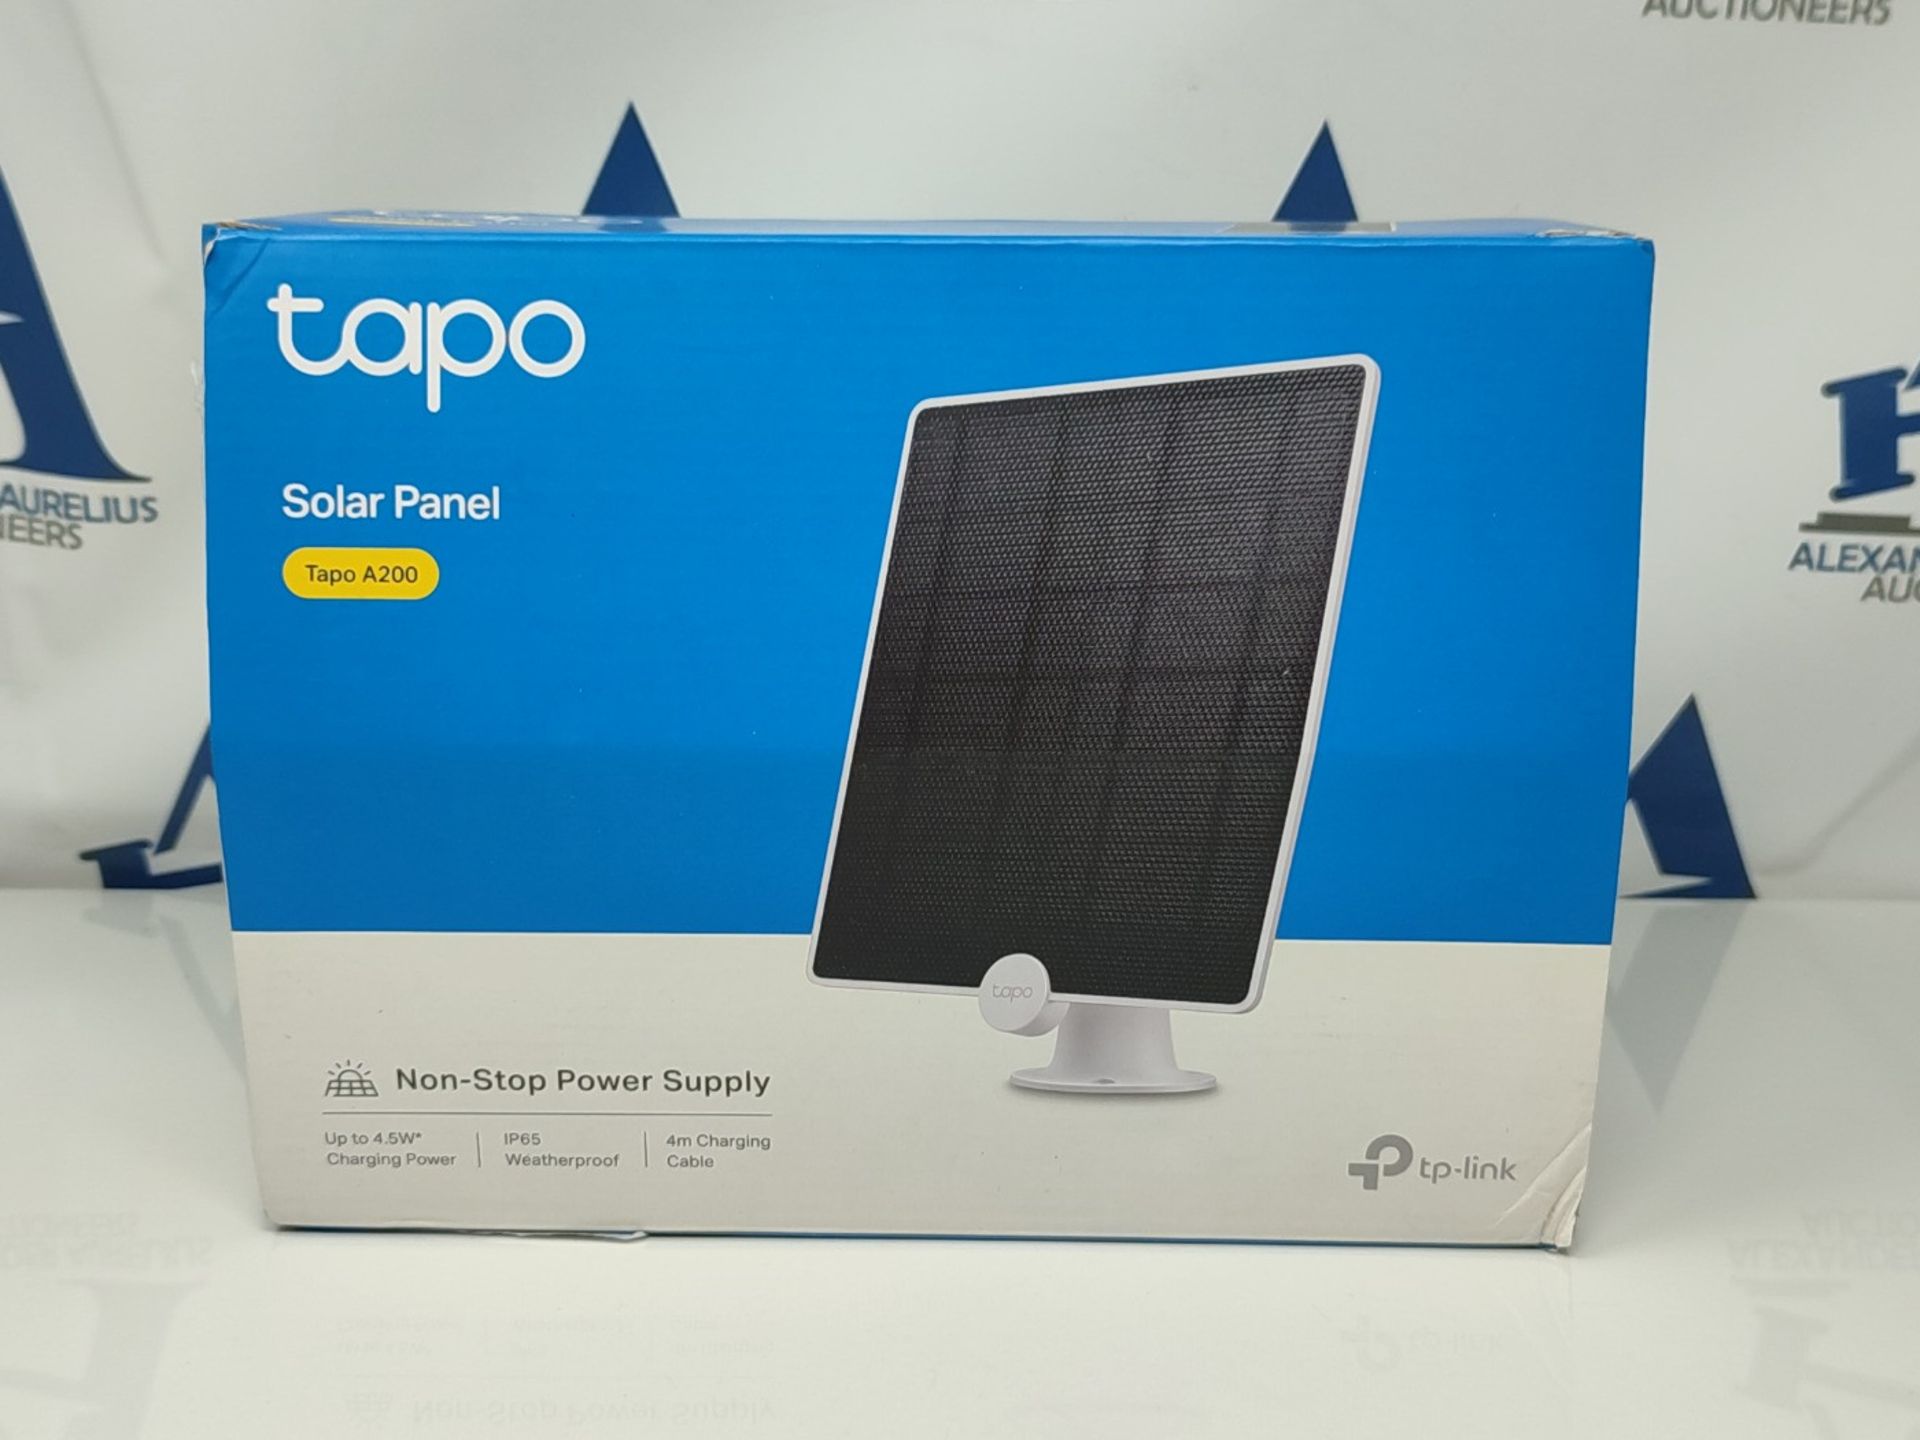 TP-Link Solar Panel, Non-Stop Solar Power, up to 4.5W Charging Power, IP65 Weatherproo - Image 2 of 3